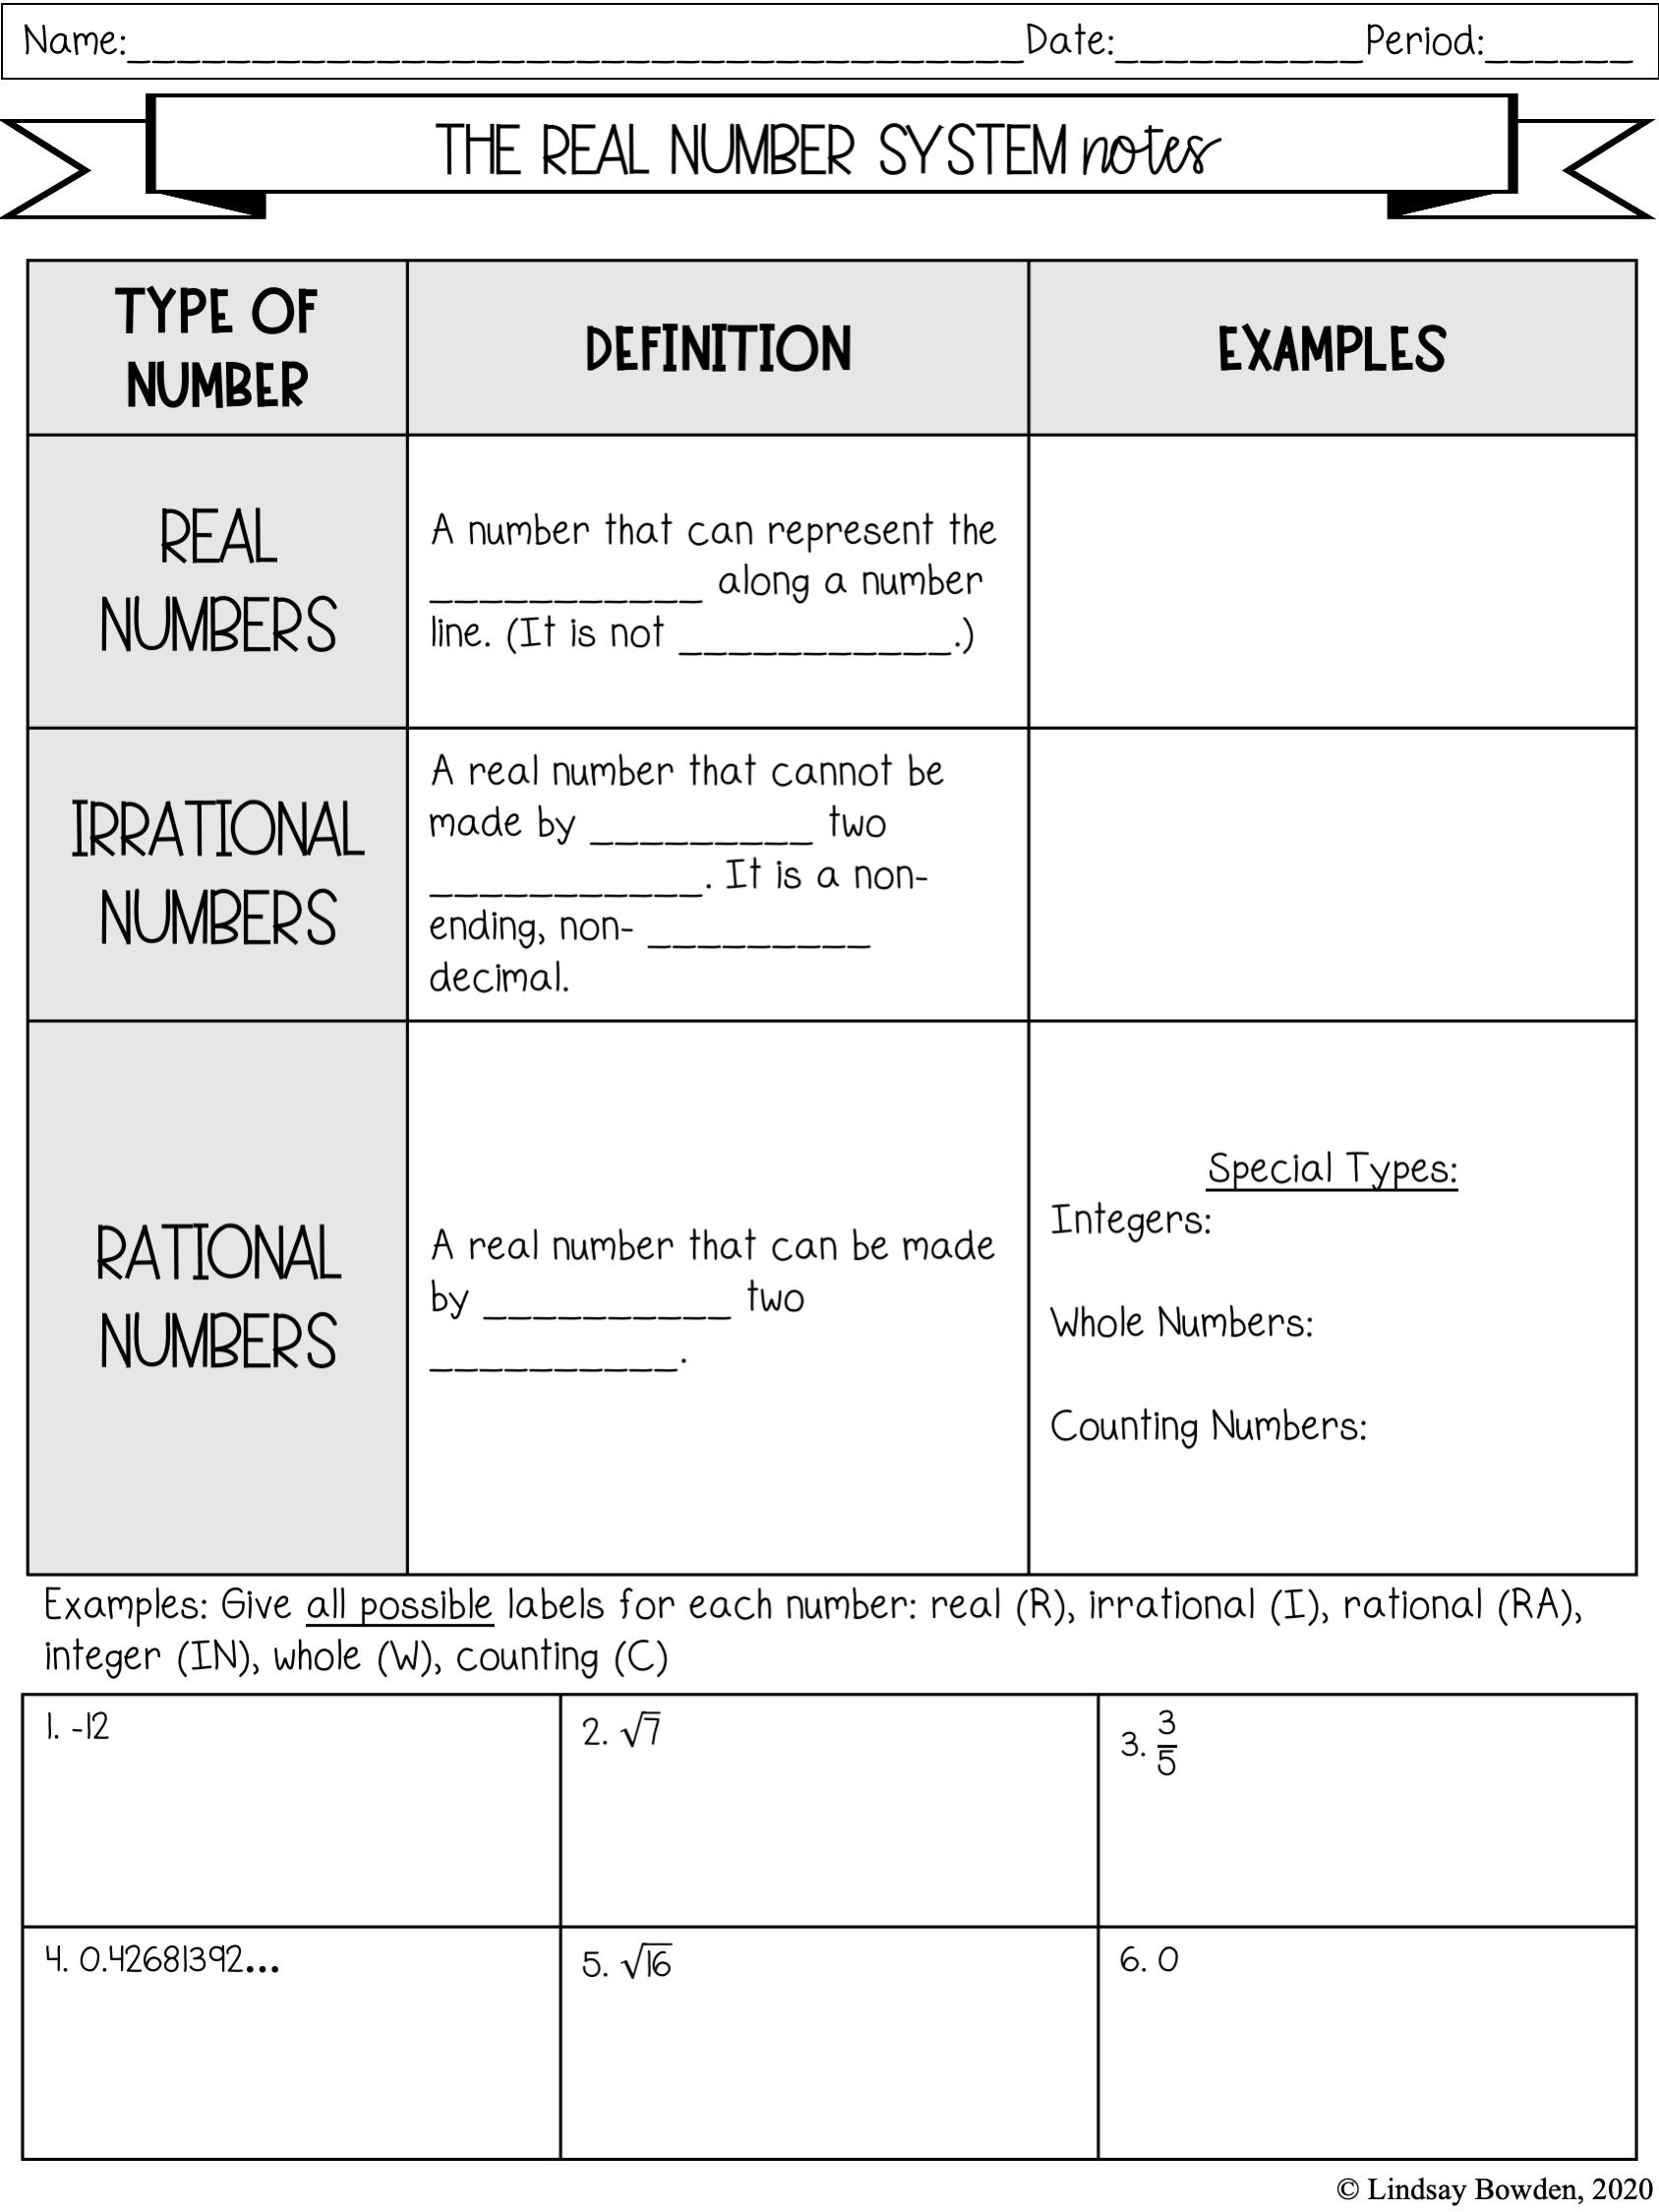 The Real Number System Notes and Worksheets - Lindsay Bowden Throughout The Real Number System Worksheet